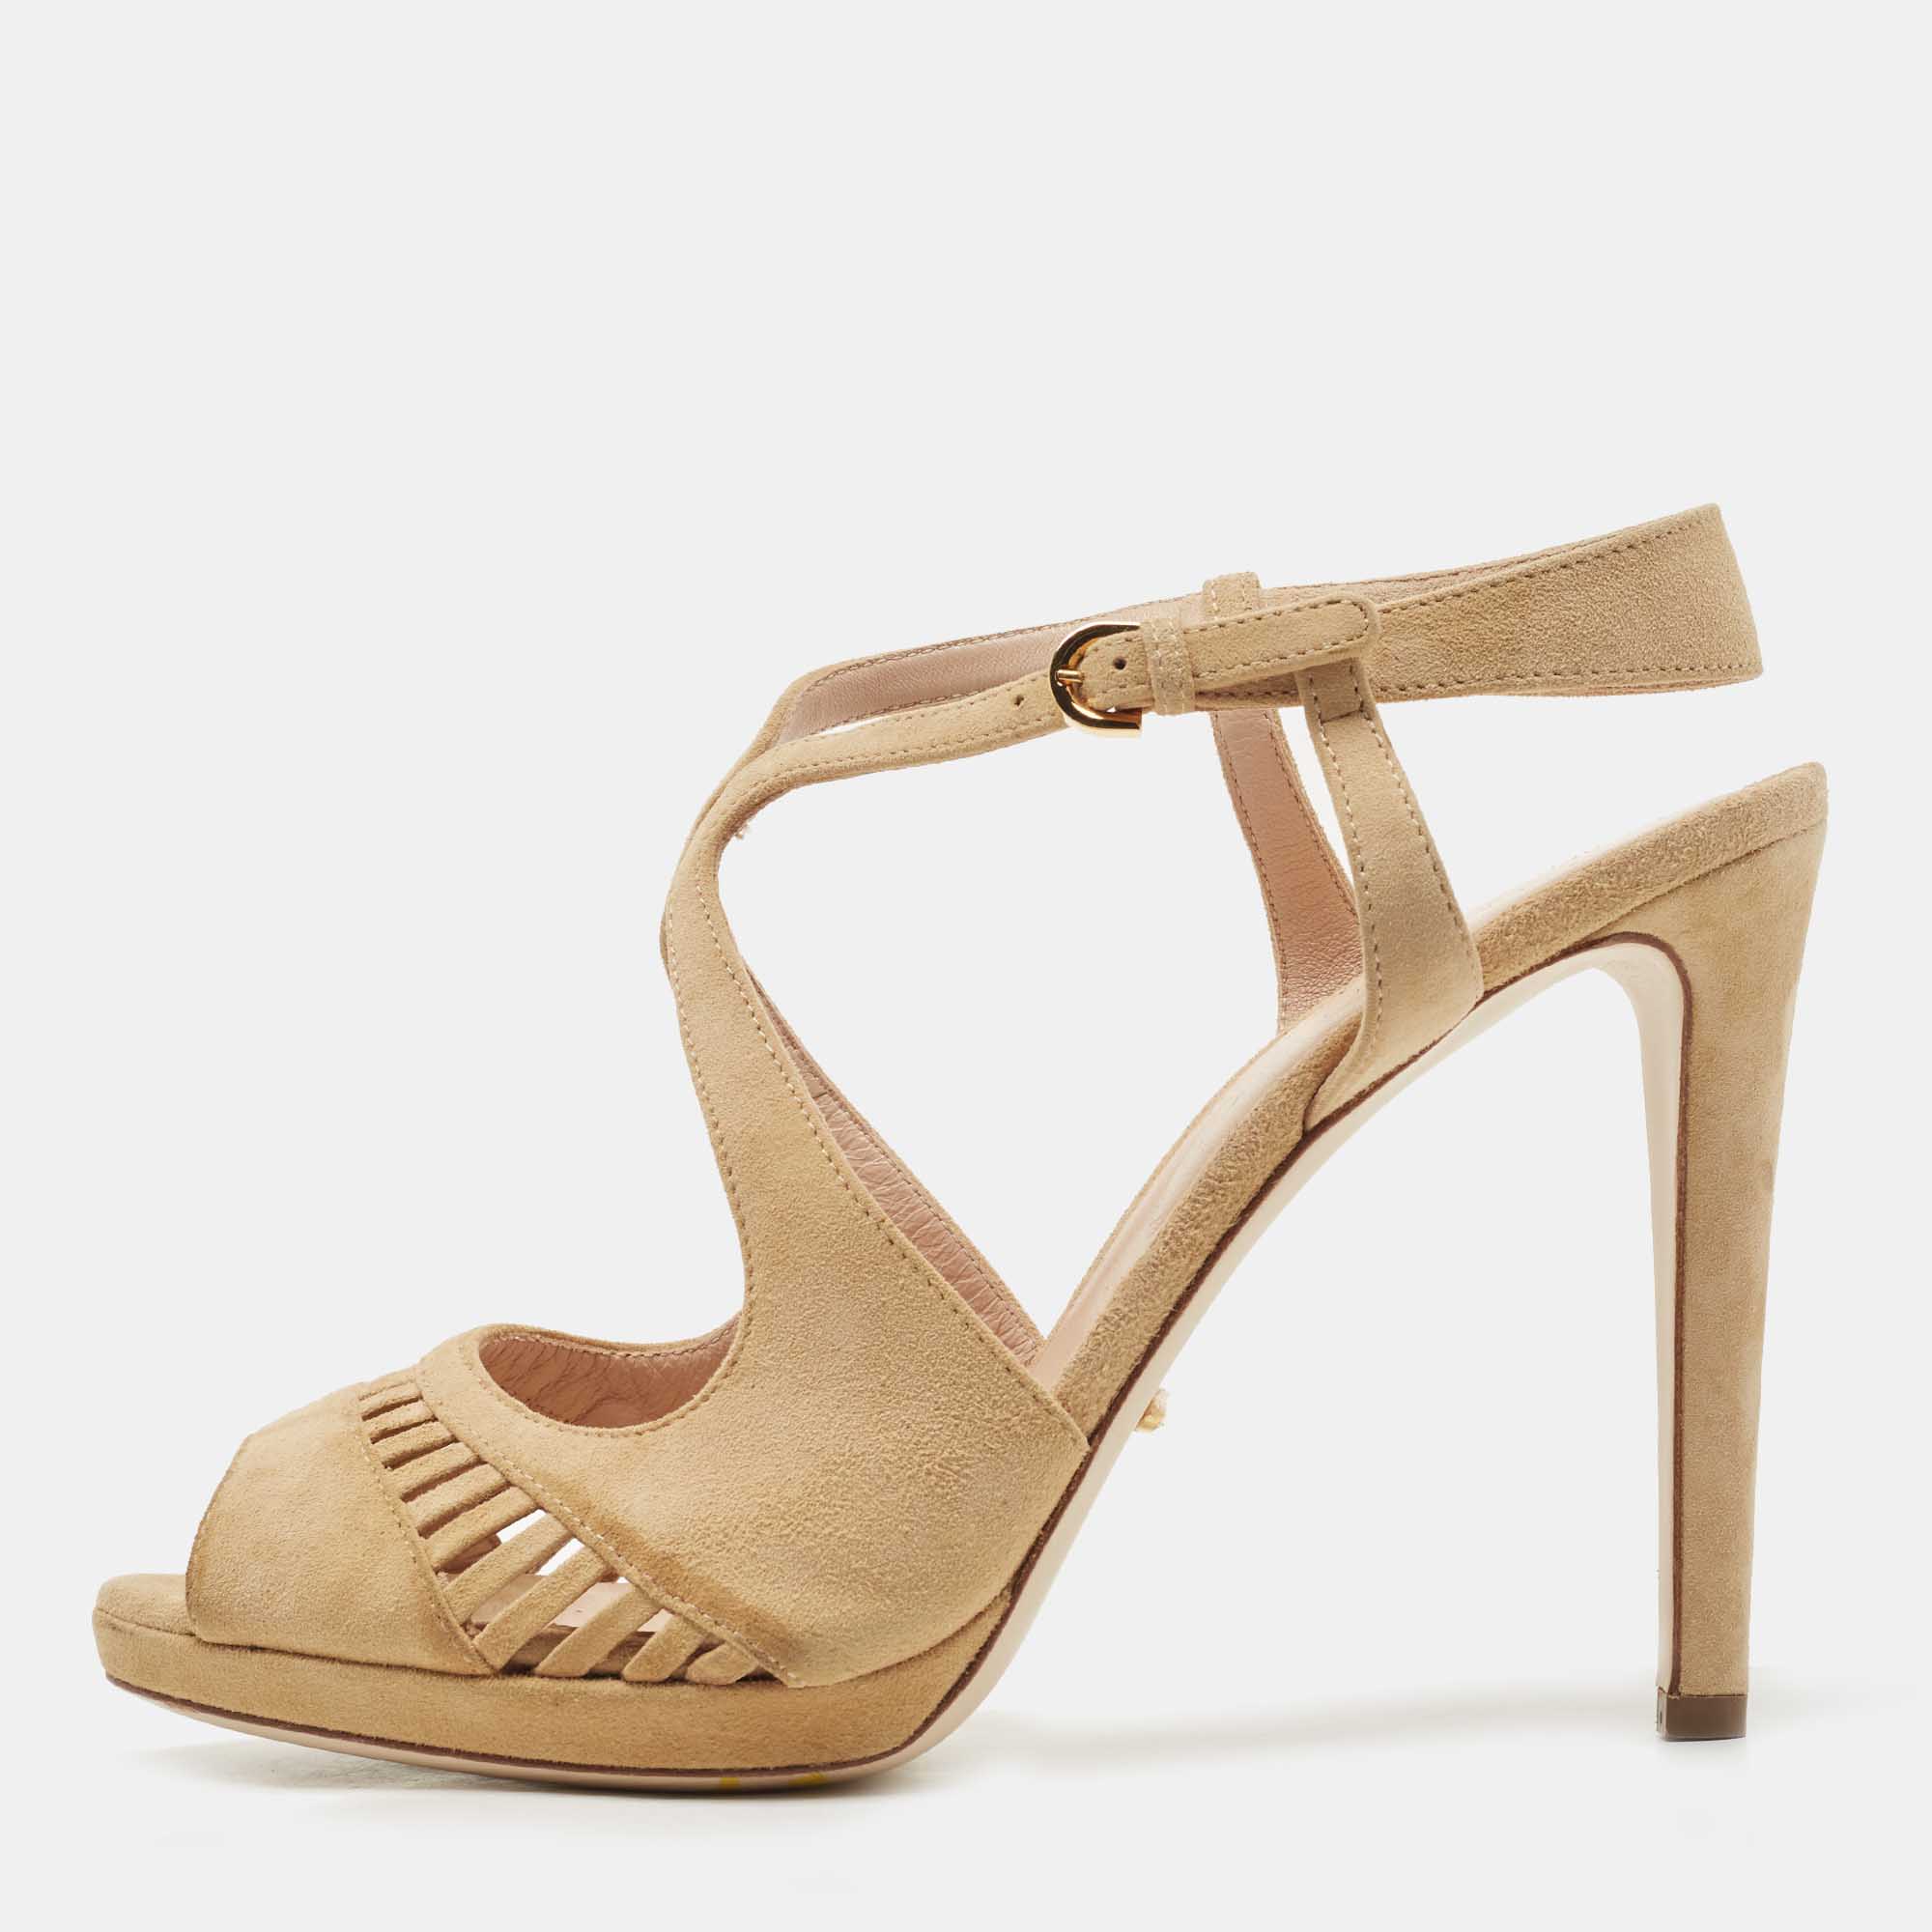 Sergio Rossi Beige Suede Cut Out Sandals Size 39